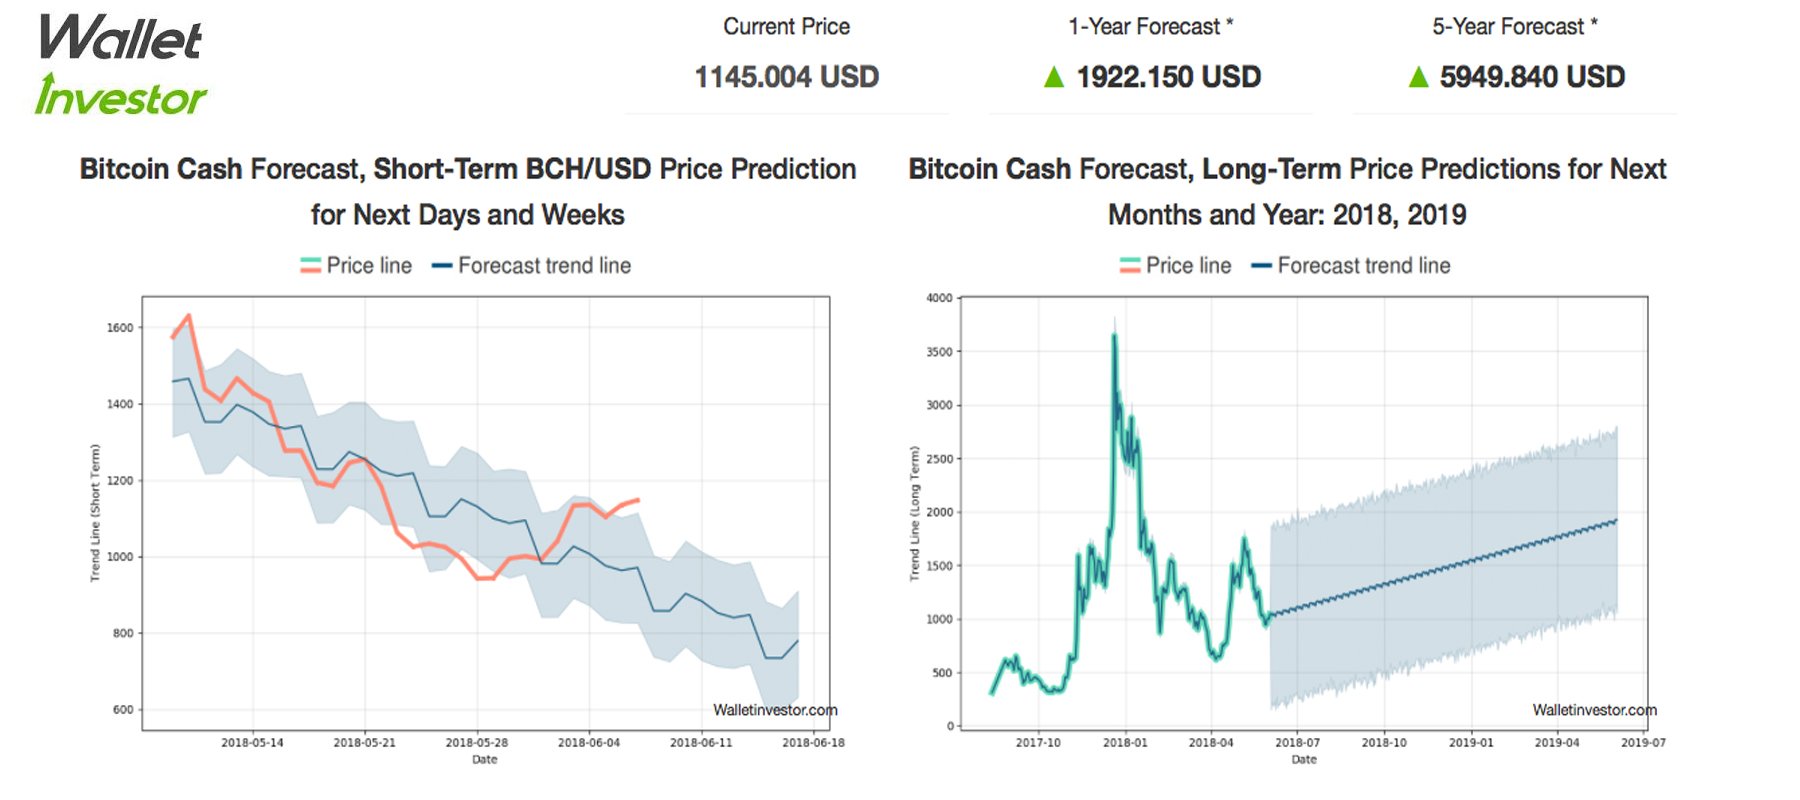 Data Prediction Sites Show More Conservative Cryptocurrency Price Forecasts 